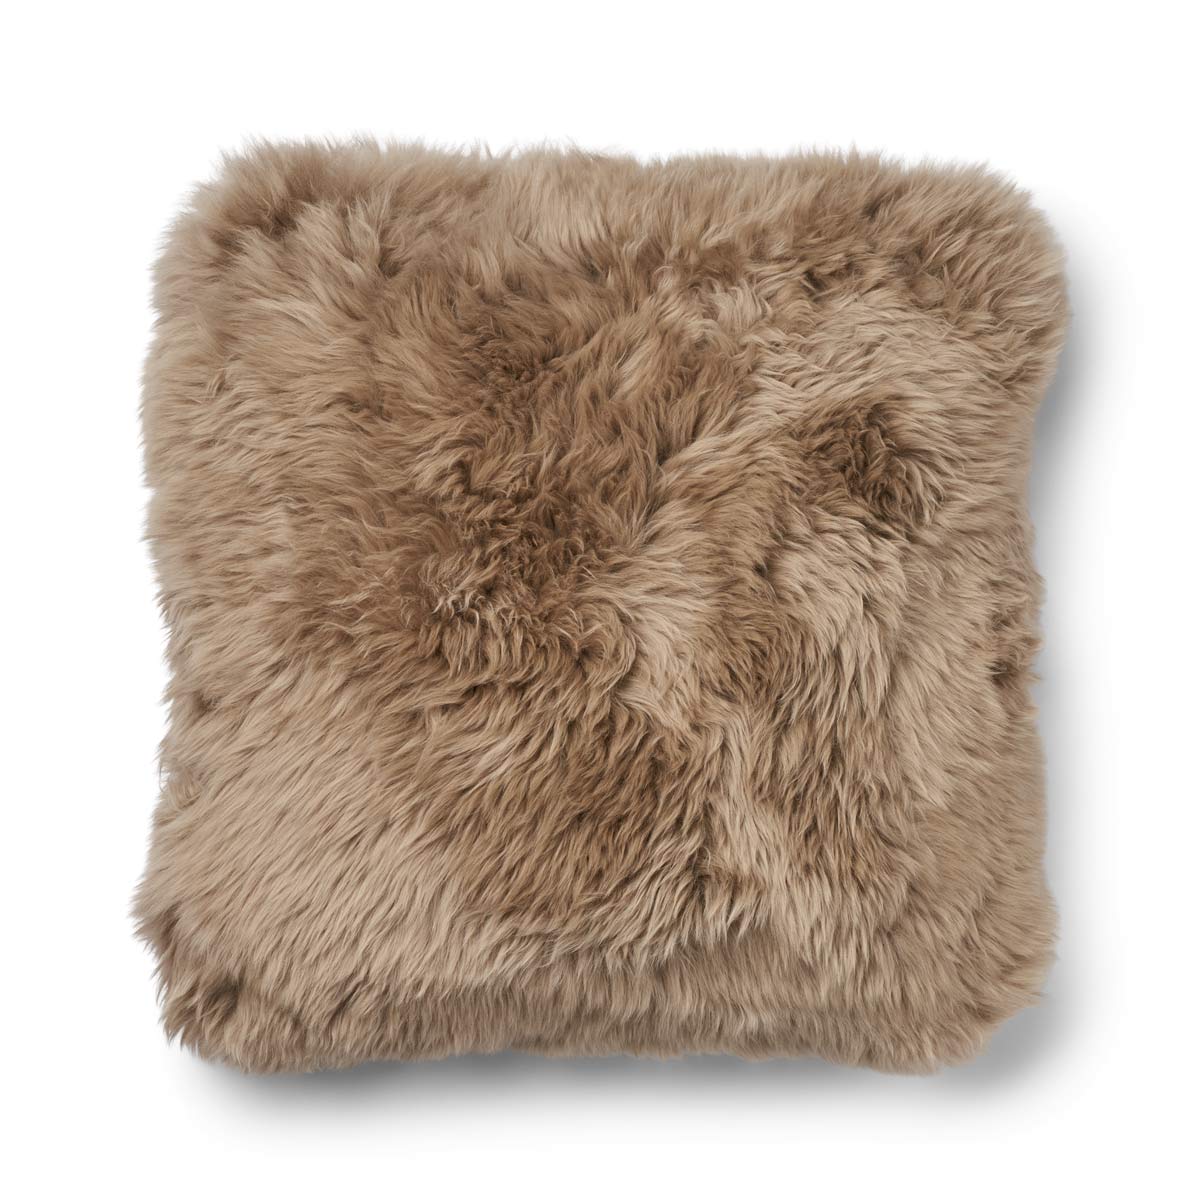 Classic Collection, Cushion One Side 100 % Wool, One Side LW New Zealand Sheepskin. Size: 52x52 cm.